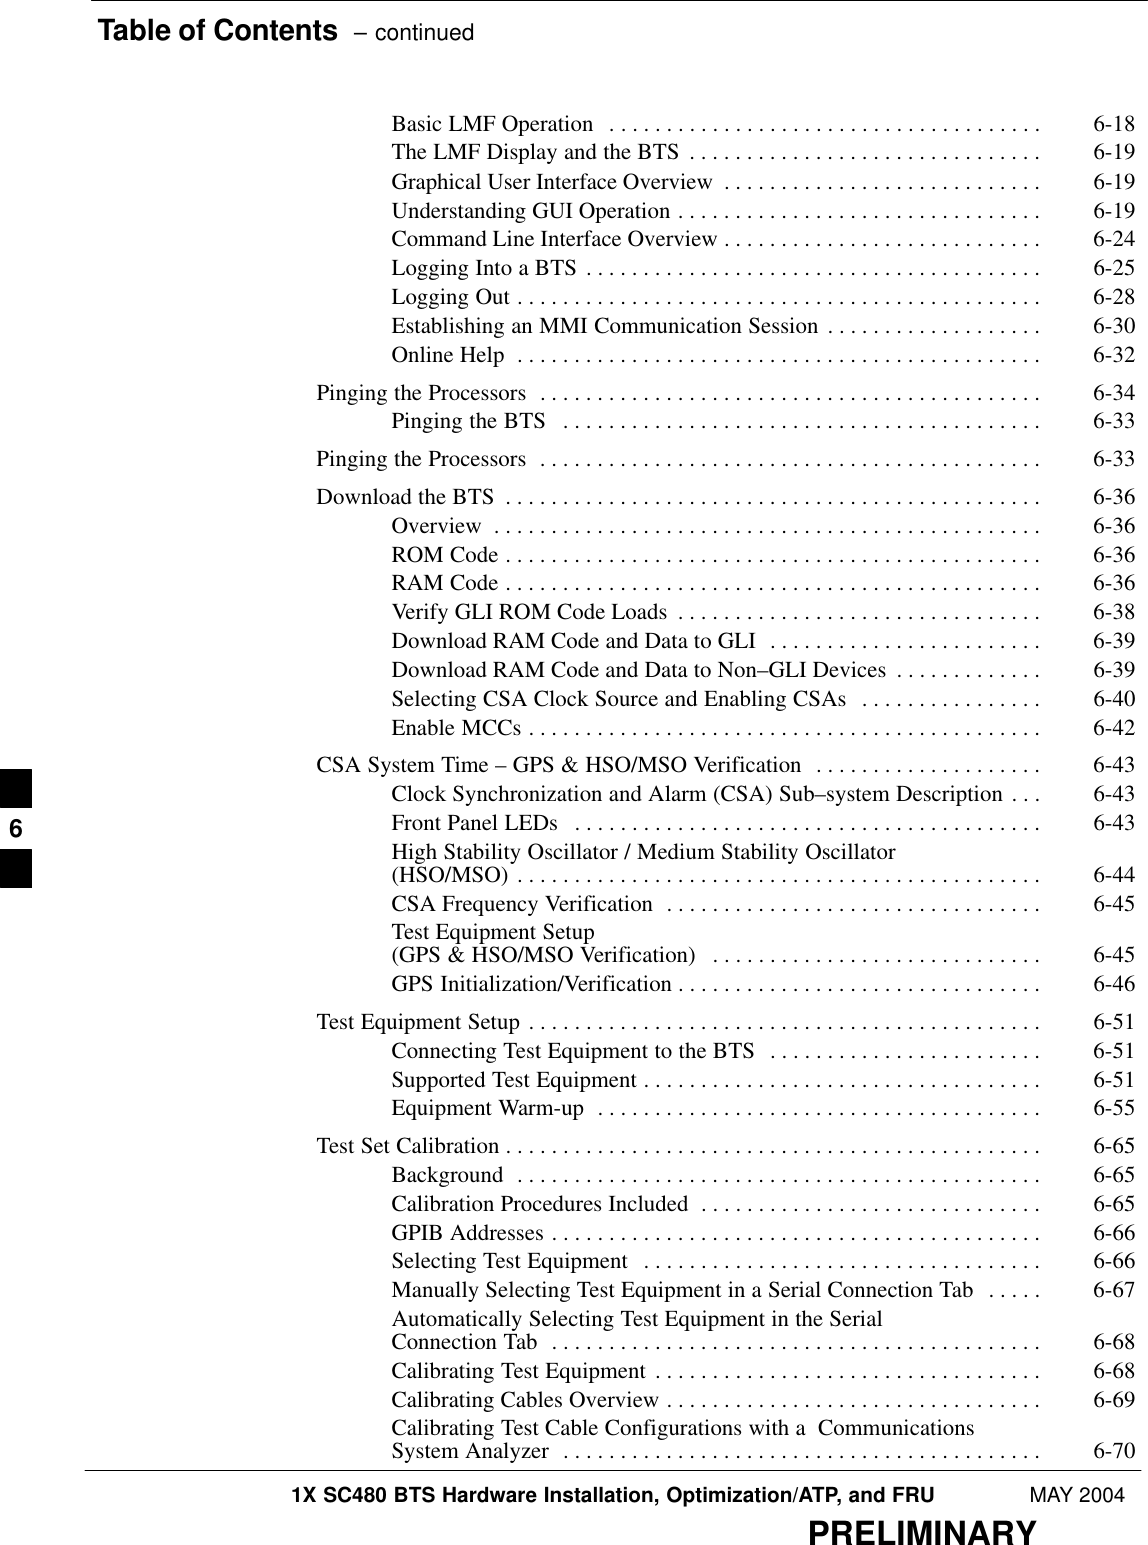 Table of Contents  – continued1X SC480 BTS Hardware Installation, Optimization/ATP, and FRU MAY 2004PRELIMINARYBasic LMF Operation 6-18 . . . . . . . . . . . . . . . . . . . . . . . . . . . . . . . . . . . . . . The LMF Display and the BTS 6-19 . . . . . . . . . . . . . . . . . . . . . . . . . . . . . . . Graphical User Interface Overview 6-19 . . . . . . . . . . . . . . . . . . . . . . . . . . . . Understanding GUI Operation 6-19 . . . . . . . . . . . . . . . . . . . . . . . . . . . . . . . . Command Line Interface Overview 6-24 . . . . . . . . . . . . . . . . . . . . . . . . . . . . Logging Into a BTS 6-25 . . . . . . . . . . . . . . . . . . . . . . . . . . . . . . . . . . . . . . . . Logging Out 6-28 . . . . . . . . . . . . . . . . . . . . . . . . . . . . . . . . . . . . . . . . . . . . . . Establishing an MMI Communication Session 6-30 . . . . . . . . . . . . . . . . . . . Online Help 6-32 . . . . . . . . . . . . . . . . . . . . . . . . . . . . . . . . . . . . . . . . . . . . . . Pinging the Processors 6-34 . . . . . . . . . . . . . . . . . . . . . . . . . . . . . . . . . . . . . . . . . . . . Pinging the BTS 6-33 . . . . . . . . . . . . . . . . . . . . . . . . . . . . . . . . . . . . . . . . . . Pinging the Processors 6-33 . . . . . . . . . . . . . . . . . . . . . . . . . . . . . . . . . . . . . . . . . . . . Download the BTS 6-36 . . . . . . . . . . . . . . . . . . . . . . . . . . . . . . . . . . . . . . . . . . . . . . . Overview 6-36 . . . . . . . . . . . . . . . . . . . . . . . . . . . . . . . . . . . . . . . . . . . . . . . . ROM Code 6-36 . . . . . . . . . . . . . . . . . . . . . . . . . . . . . . . . . . . . . . . . . . . . . . . RAM Code 6-36 . . . . . . . . . . . . . . . . . . . . . . . . . . . . . . . . . . . . . . . . . . . . . . . Verify GLI ROM Code Loads 6-38 . . . . . . . . . . . . . . . . . . . . . . . . . . . . . . . . Download RAM Code and Data to GLI 6-39 . . . . . . . . . . . . . . . . . . . . . . . . Download RAM Code and Data to Non–GLI Devices 6-39 . . . . . . . . . . . . . Selecting CSA Clock Source and Enabling CSAs 6-40 . . . . . . . . . . . . . . . . Enable MCCs 6-42 . . . . . . . . . . . . . . . . . . . . . . . . . . . . . . . . . . . . . . . . . . . . . CSA System Time – GPS &amp; HSO/MSO Verification 6-43 . . . . . . . . . . . . . . . . . . . . Clock Synchronization and Alarm (CSA) Sub–system Description 6-43 . . . Front Panel LEDs 6-43 . . . . . . . . . . . . . . . . . . . . . . . . . . . . . . . . . . . . . . . . . High Stability Oscillator / Medium Stability Oscillator (HSO/MSO) 6-44 . . . . . . . . . . . . . . . . . . . . . . . . . . . . . . . . . . . . . . . . . . . . . . CSA Frequency Verification 6-45 . . . . . . . . . . . . . . . . . . . . . . . . . . . . . . . . . Test Equipment Setup (GPS &amp; HSO/MSO Verification) 6-45 . . . . . . . . . . . . . . . . . . . . . . . . . . . . . GPS Initialization/Verification 6-46 . . . . . . . . . . . . . . . . . . . . . . . . . . . . . . . . Test Equipment Setup 6-51 . . . . . . . . . . . . . . . . . . . . . . . . . . . . . . . . . . . . . . . . . . . . . Connecting Test Equipment to the BTS 6-51 . . . . . . . . . . . . . . . . . . . . . . . . Supported Test Equipment 6-51 . . . . . . . . . . . . . . . . . . . . . . . . . . . . . . . . . . . Equipment Warm-up 6-55 . . . . . . . . . . . . . . . . . . . . . . . . . . . . . . . . . . . . . . . Test Set Calibration 6-65 . . . . . . . . . . . . . . . . . . . . . . . . . . . . . . . . . . . . . . . . . . . . . . . Background 6-65 . . . . . . . . . . . . . . . . . . . . . . . . . . . . . . . . . . . . . . . . . . . . . . Calibration Procedures Included 6-65 . . . . . . . . . . . . . . . . . . . . . . . . . . . . . . GPIB Addresses 6-66 . . . . . . . . . . . . . . . . . . . . . . . . . . . . . . . . . . . . . . . . . . . Selecting Test Equipment 6-66 . . . . . . . . . . . . . . . . . . . . . . . . . . . . . . . . . . . Manually Selecting Test Equipment in a Serial Connection Tab 6-67 . . . . . Automatically Selecting Test Equipment in the Serial Connection Tab 6-68 . . . . . . . . . . . . . . . . . . . . . . . . . . . . . . . . . . . . . . . . . . . Calibrating Test Equipment 6-68 . . . . . . . . . . . . . . . . . . . . . . . . . . . . . . . . . . Calibrating Cables Overview 6-69 . . . . . . . . . . . . . . . . . . . . . . . . . . . . . . . . . Calibrating Test Cable Configurations with a  Communications System Analyzer 6-70 . . . . . . . . . . . . . . . . . . . . . . . . . . . . . . . . . . . . . . . . . . 6